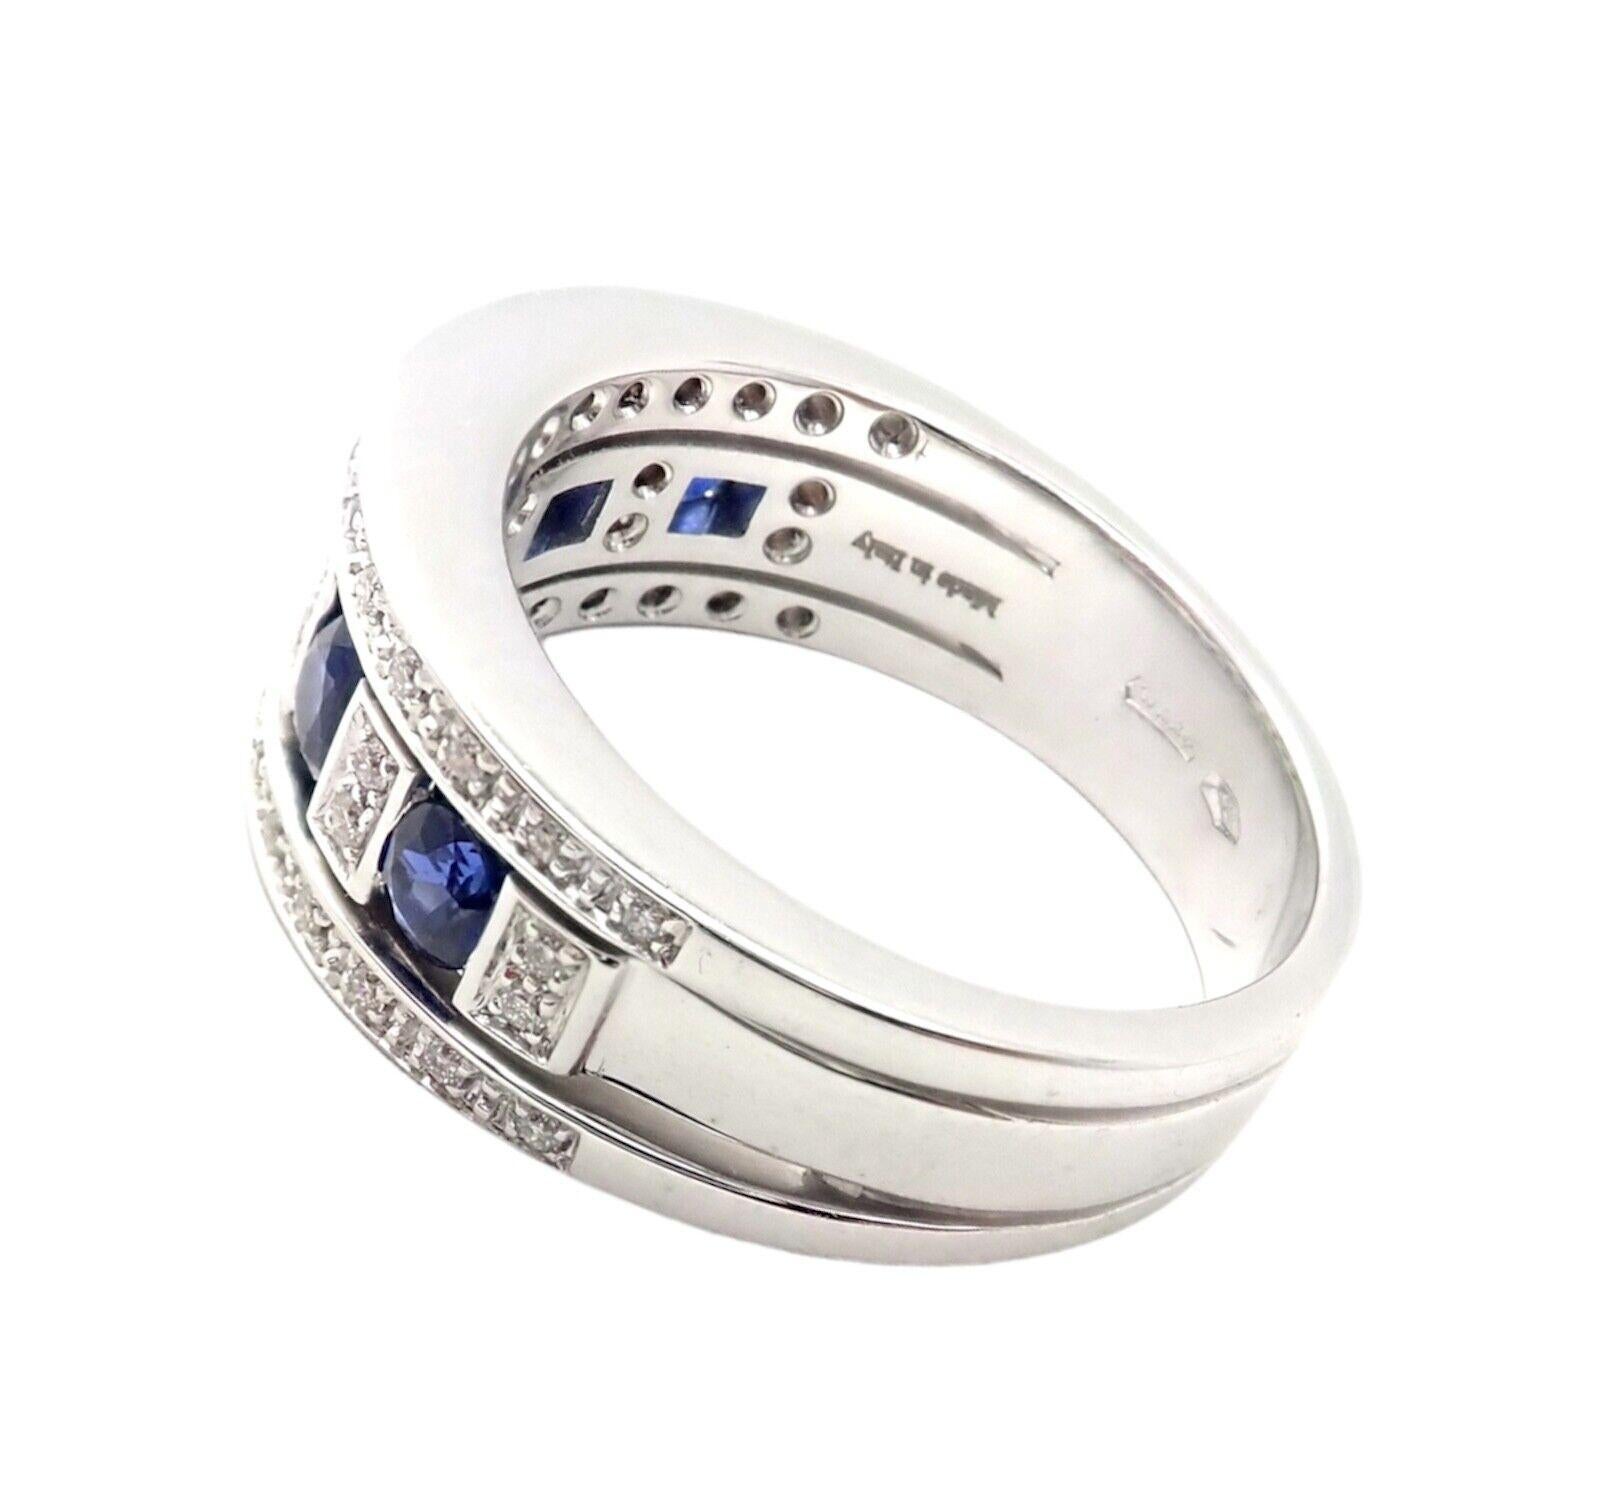 18k White Gold Diamond And Sapphire Band Ring by Damiani.  
With 46 Round brilliant cut diamonds VS1 clarity, G color - Approx 0.50ctw
5 Round brilliant cut sapphires
This ring comes with original box and paper.
Details: 
Size 6.5
Weight: 8.8